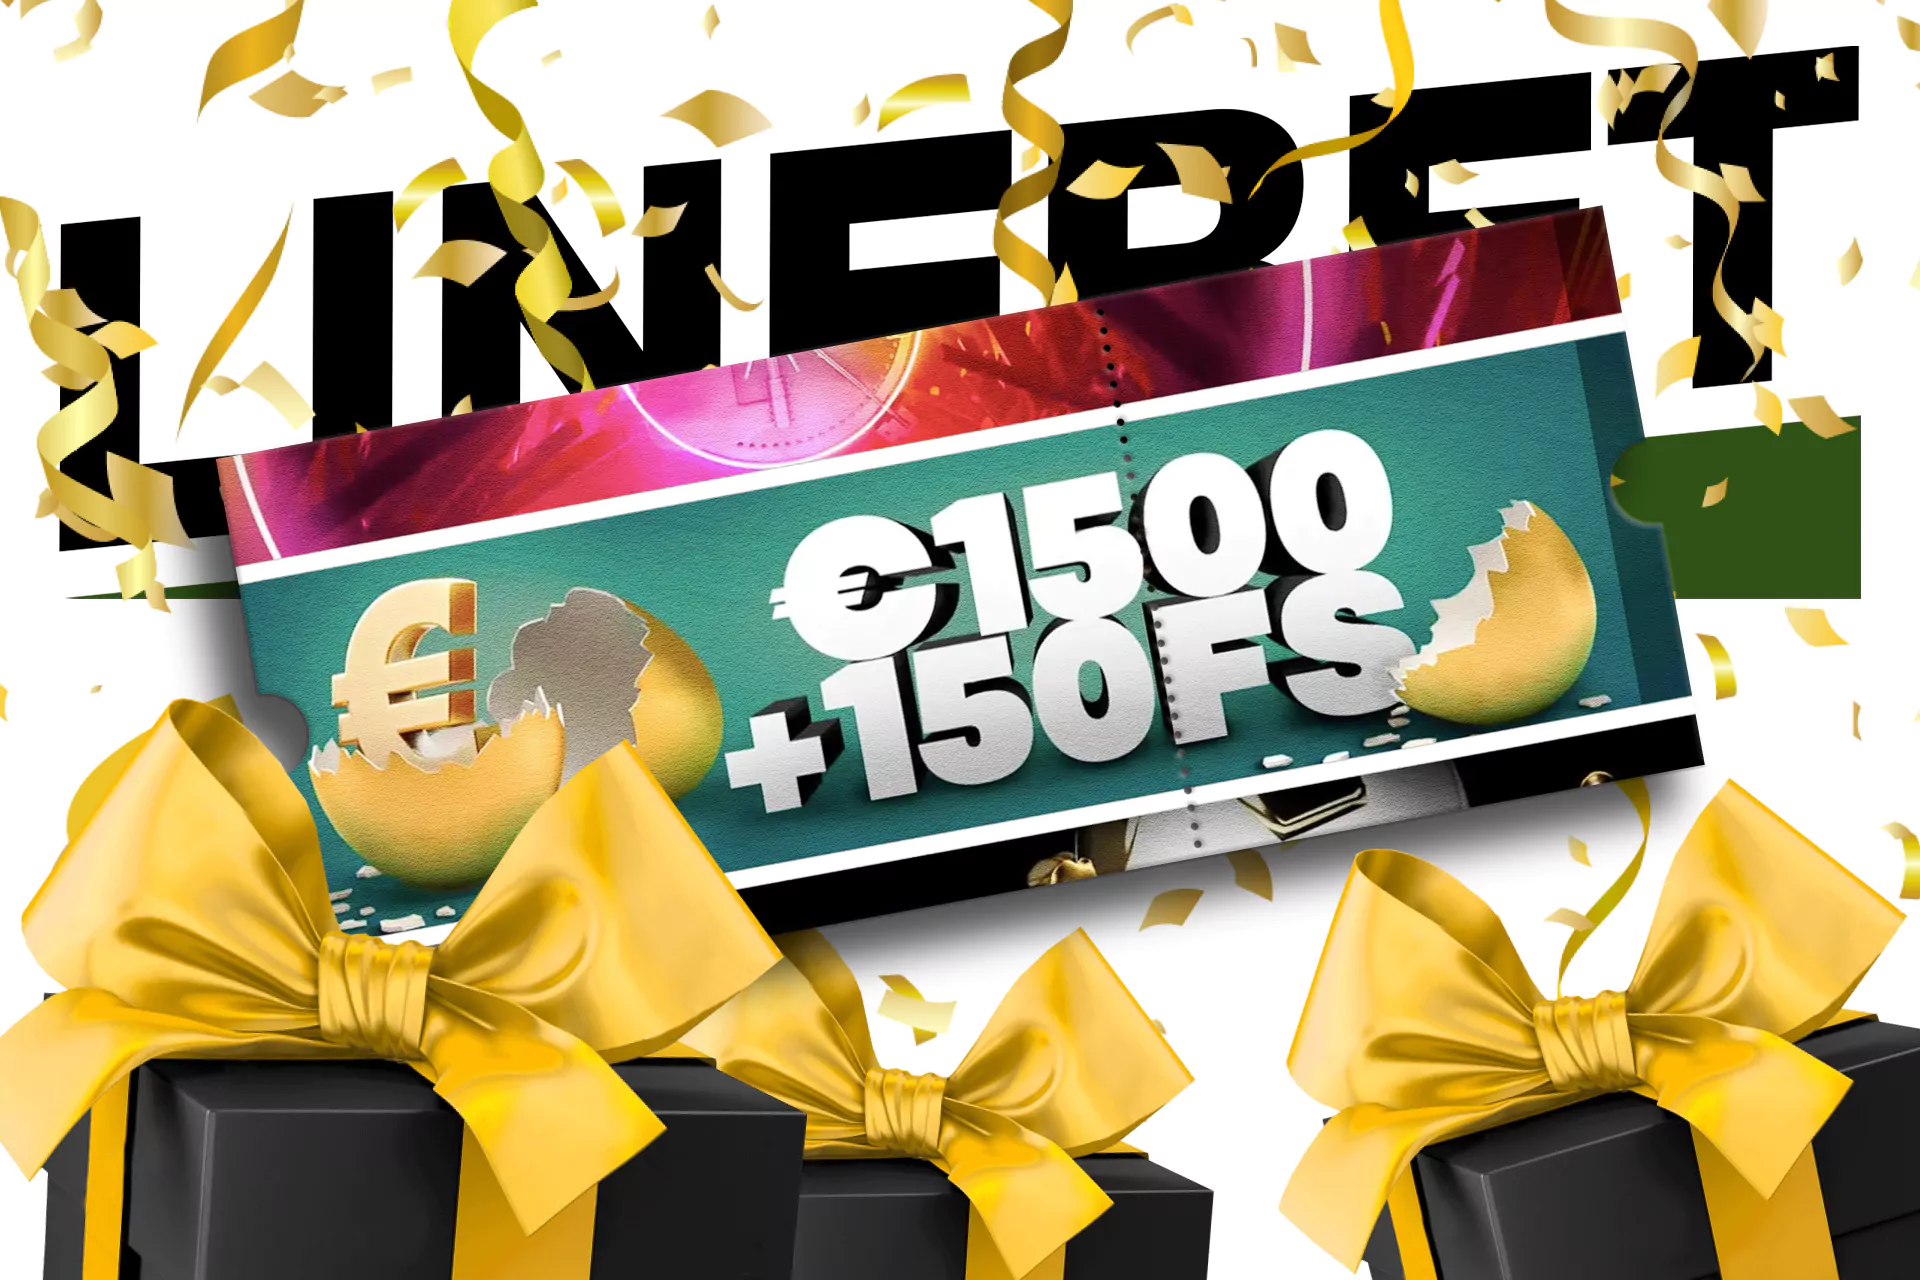 Linebet has prepared a special bonus for players that will make playing blackjack more enjoyable.